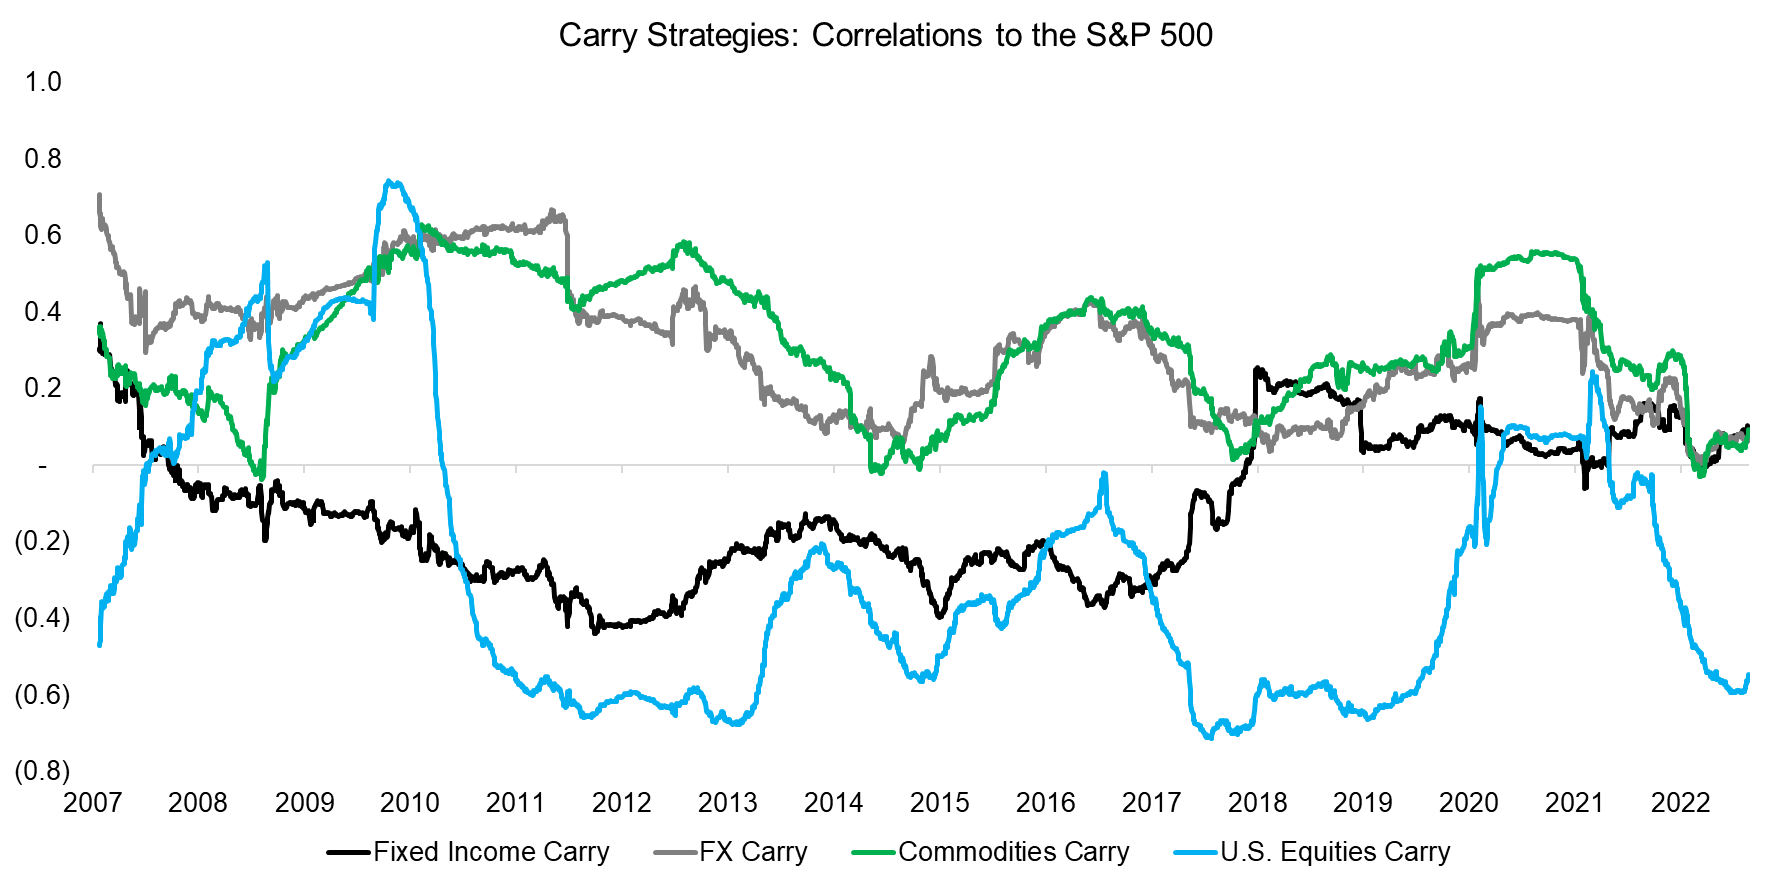 Carry Strategies Correlations to the S&P 500